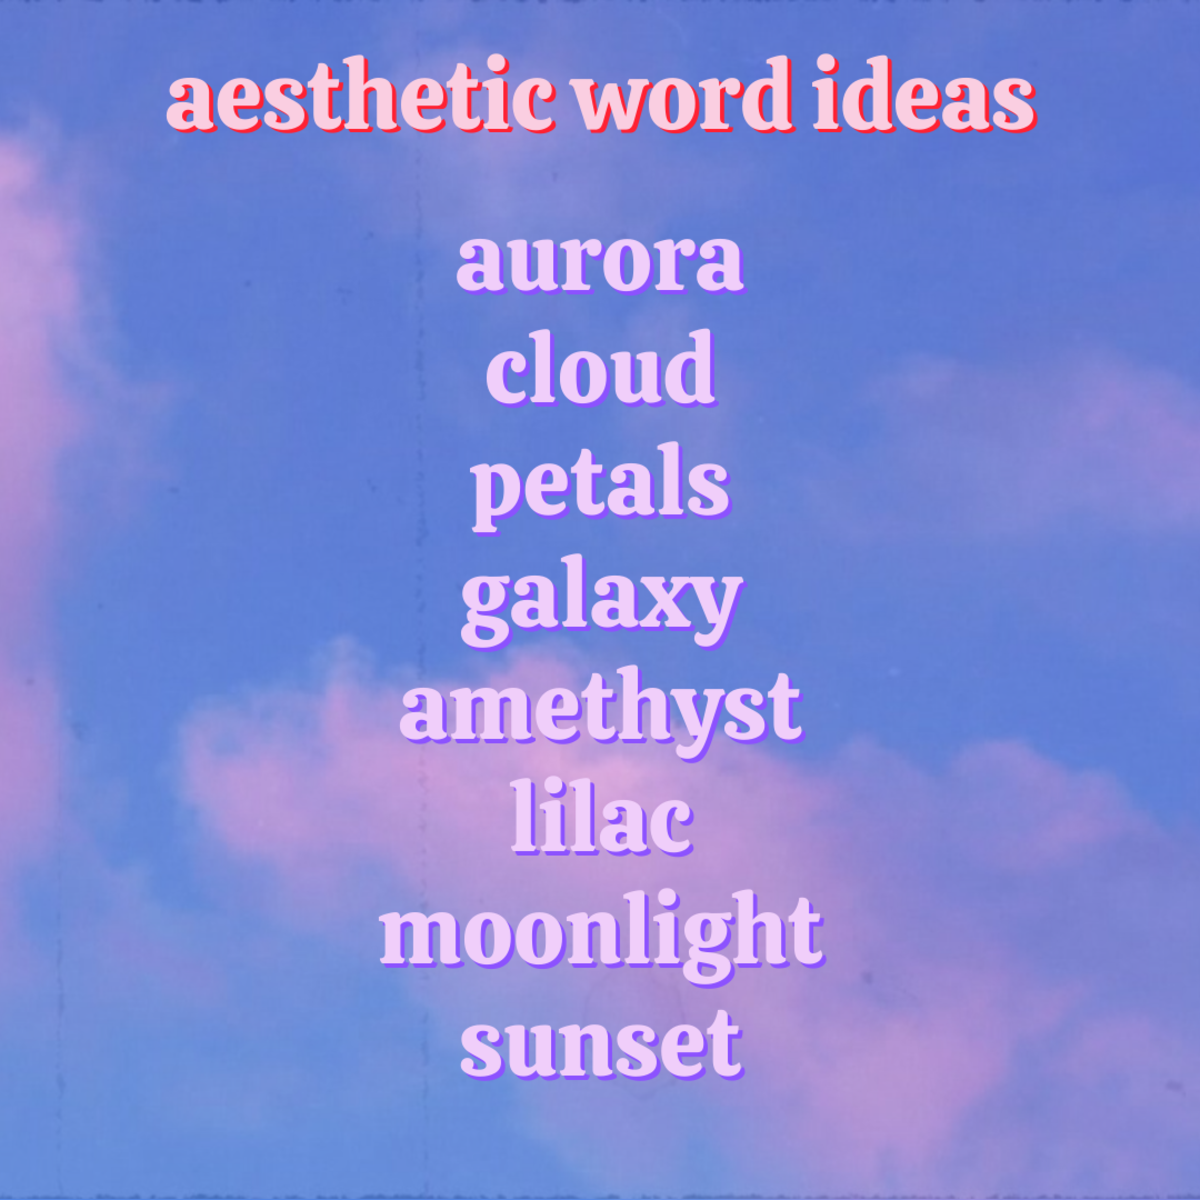 Here are some cute aesthetic word ideas to help you with creating a username!